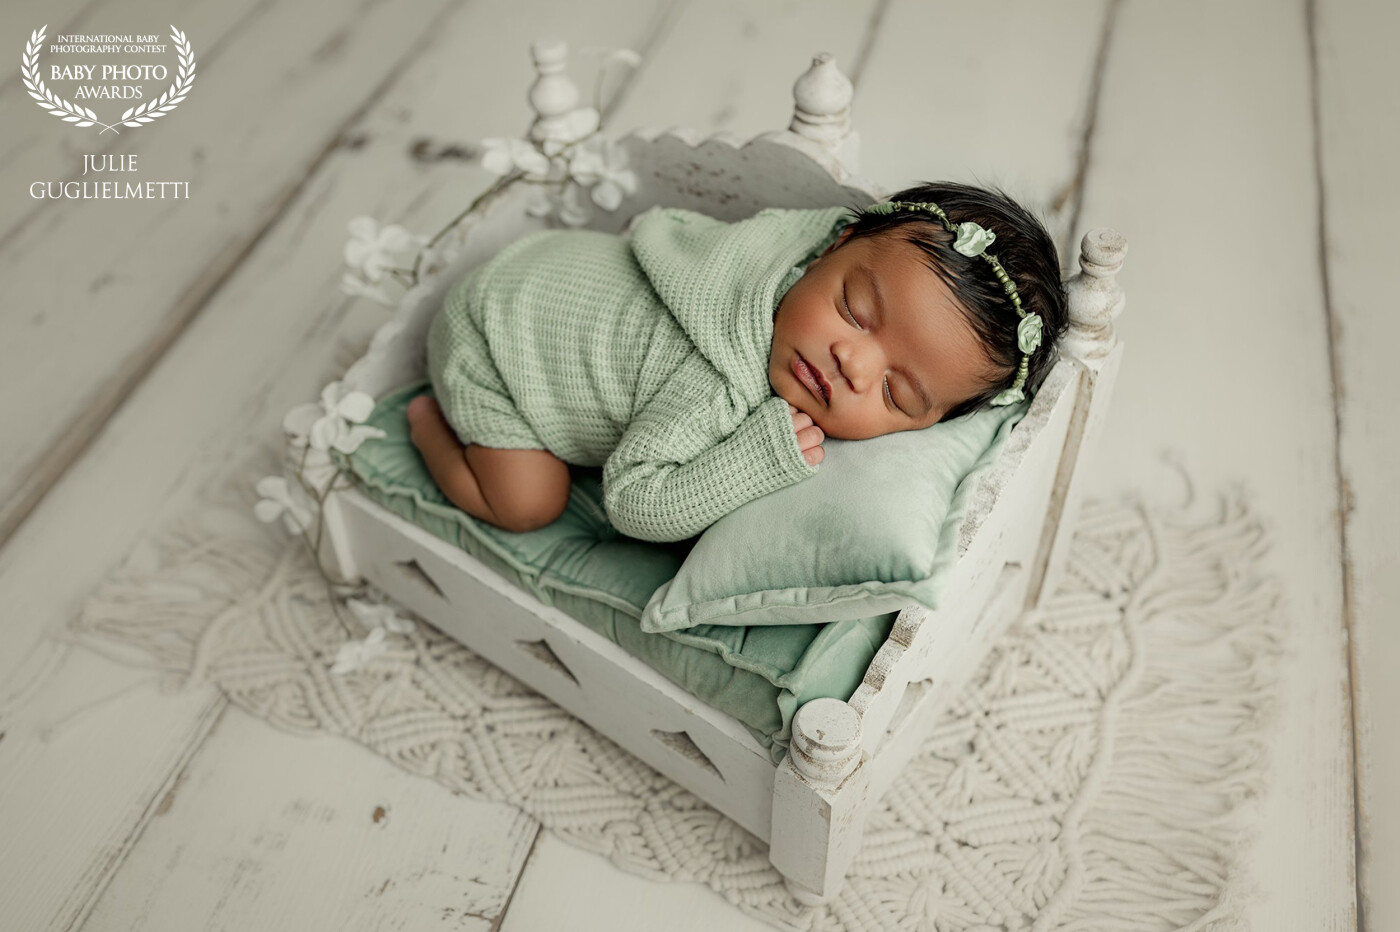 Tiny little jewel dressed in a mint green.<br />
Is there something cuter than those little adorable newborn outfits?